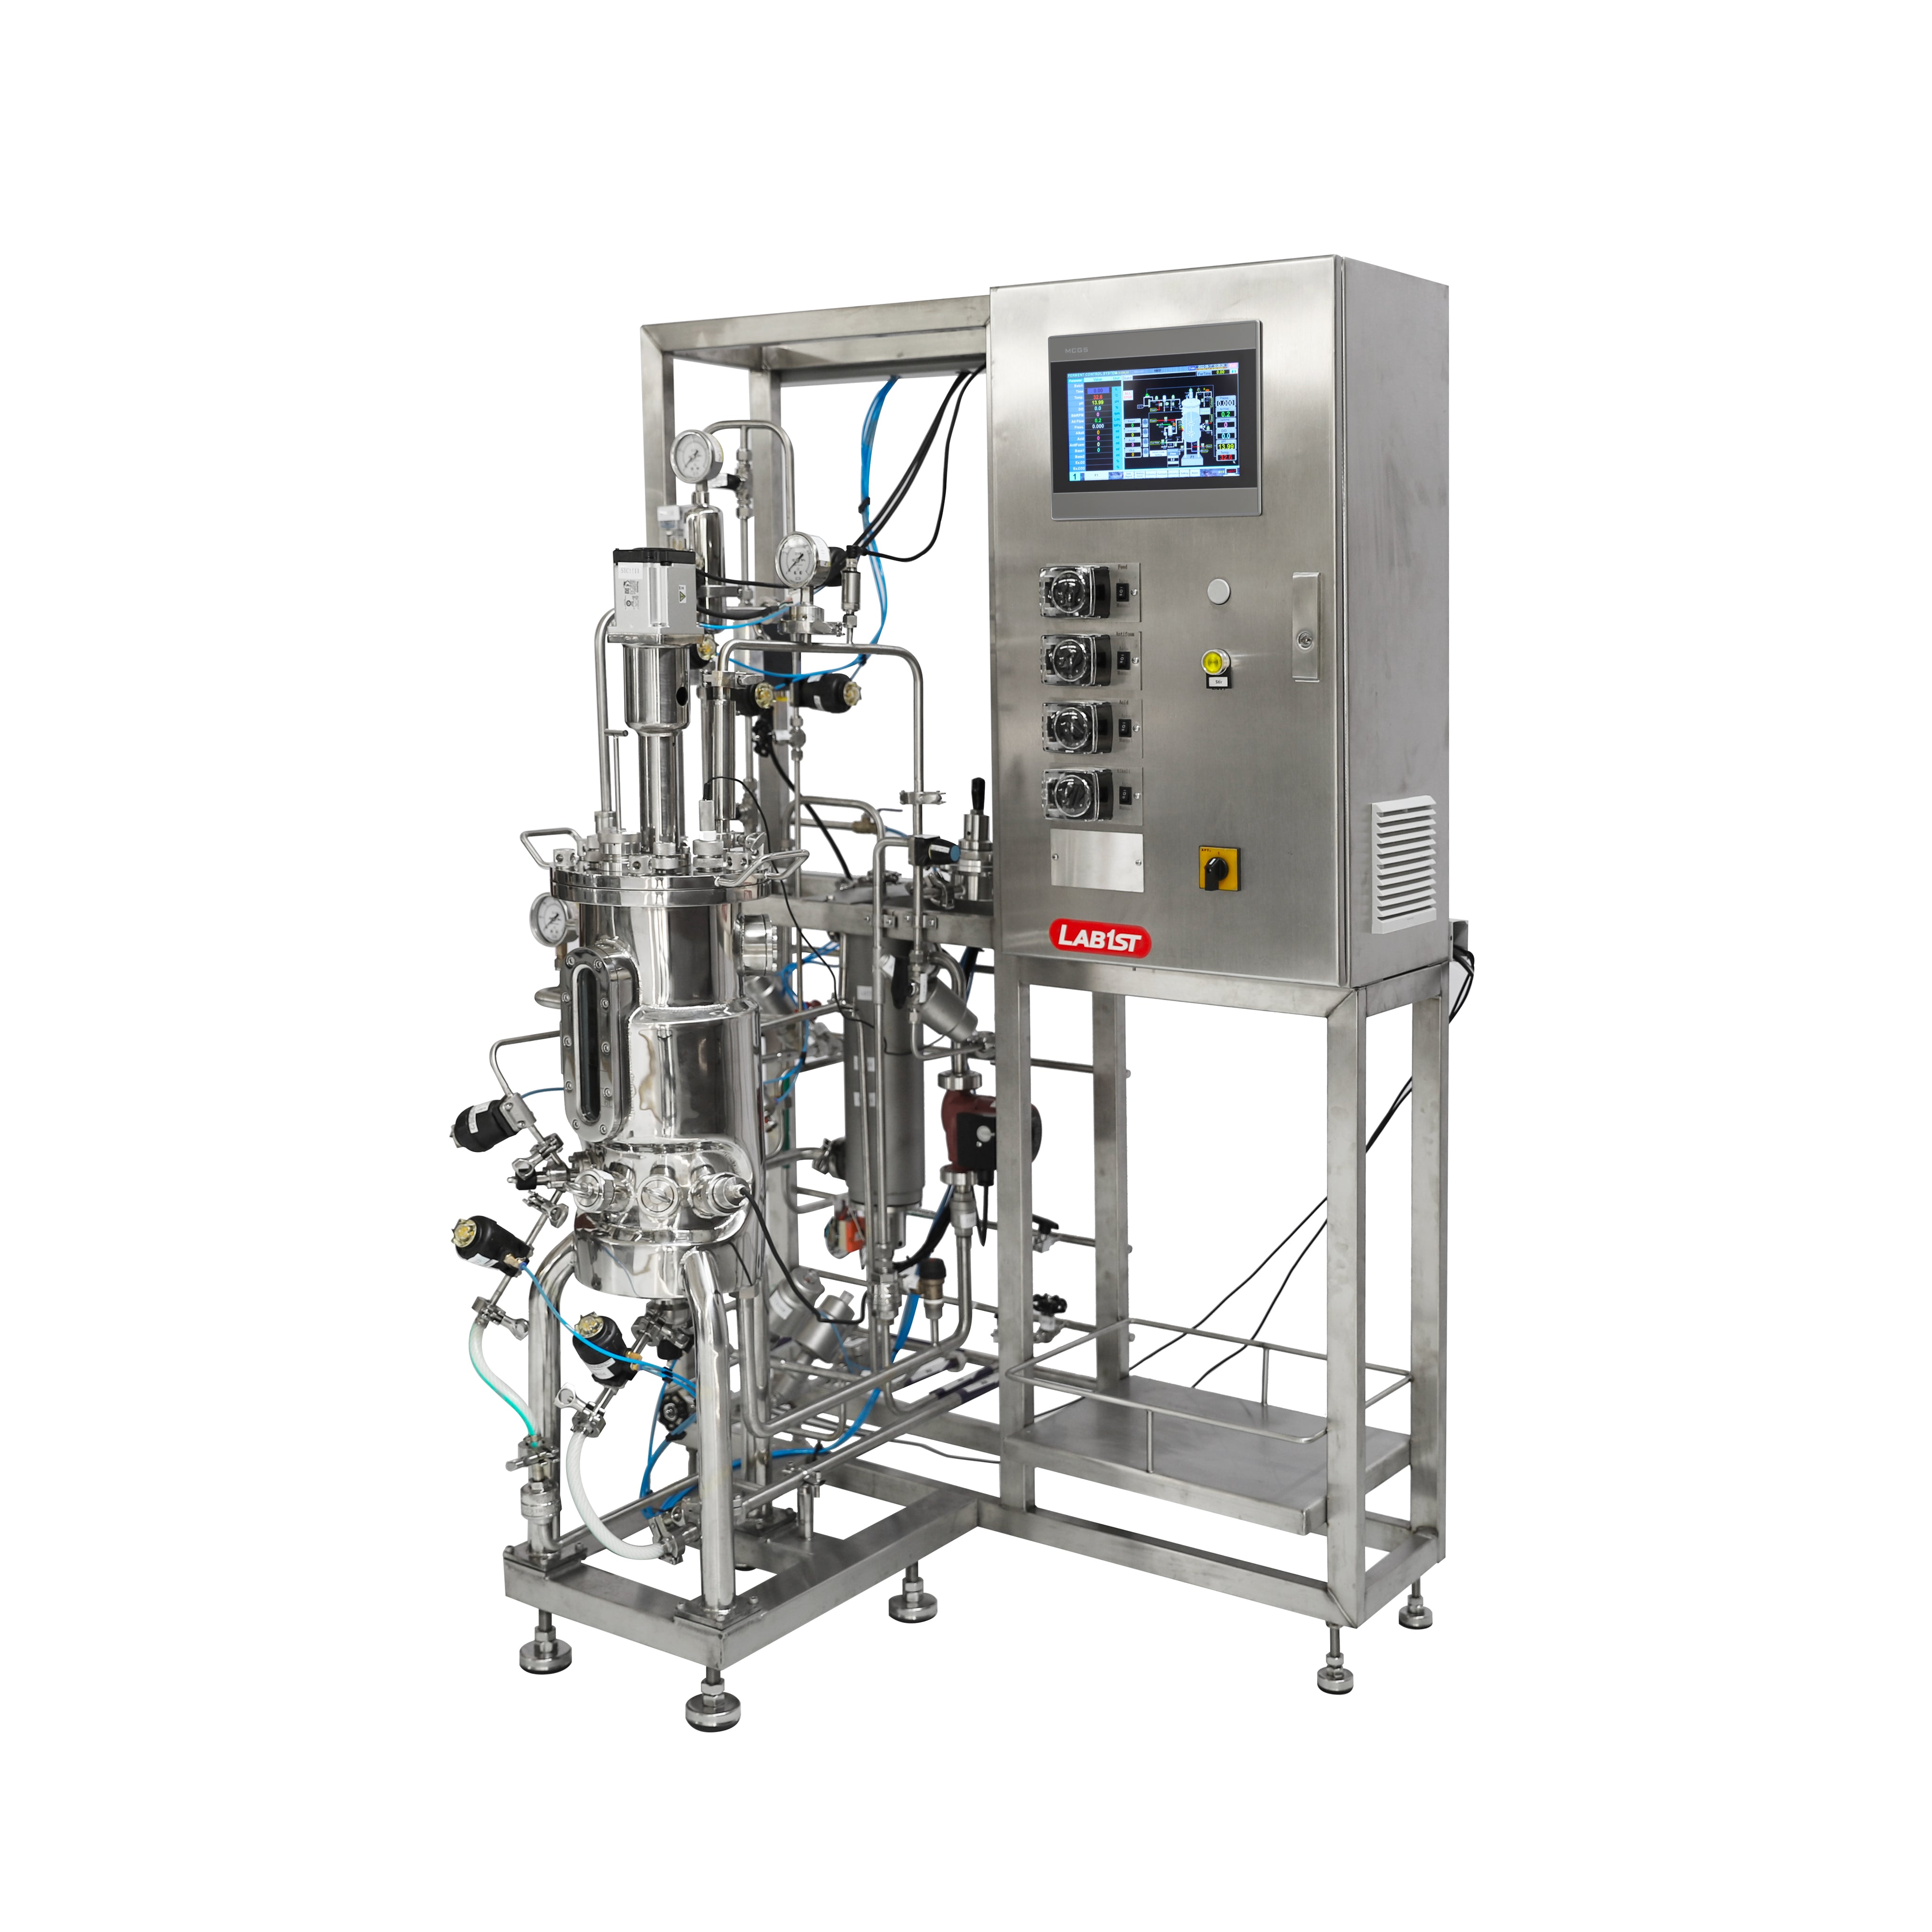 20L Stainless Steel Bioreactor for Microbial Fermentation with 2 Gas Inlets BR500-M1